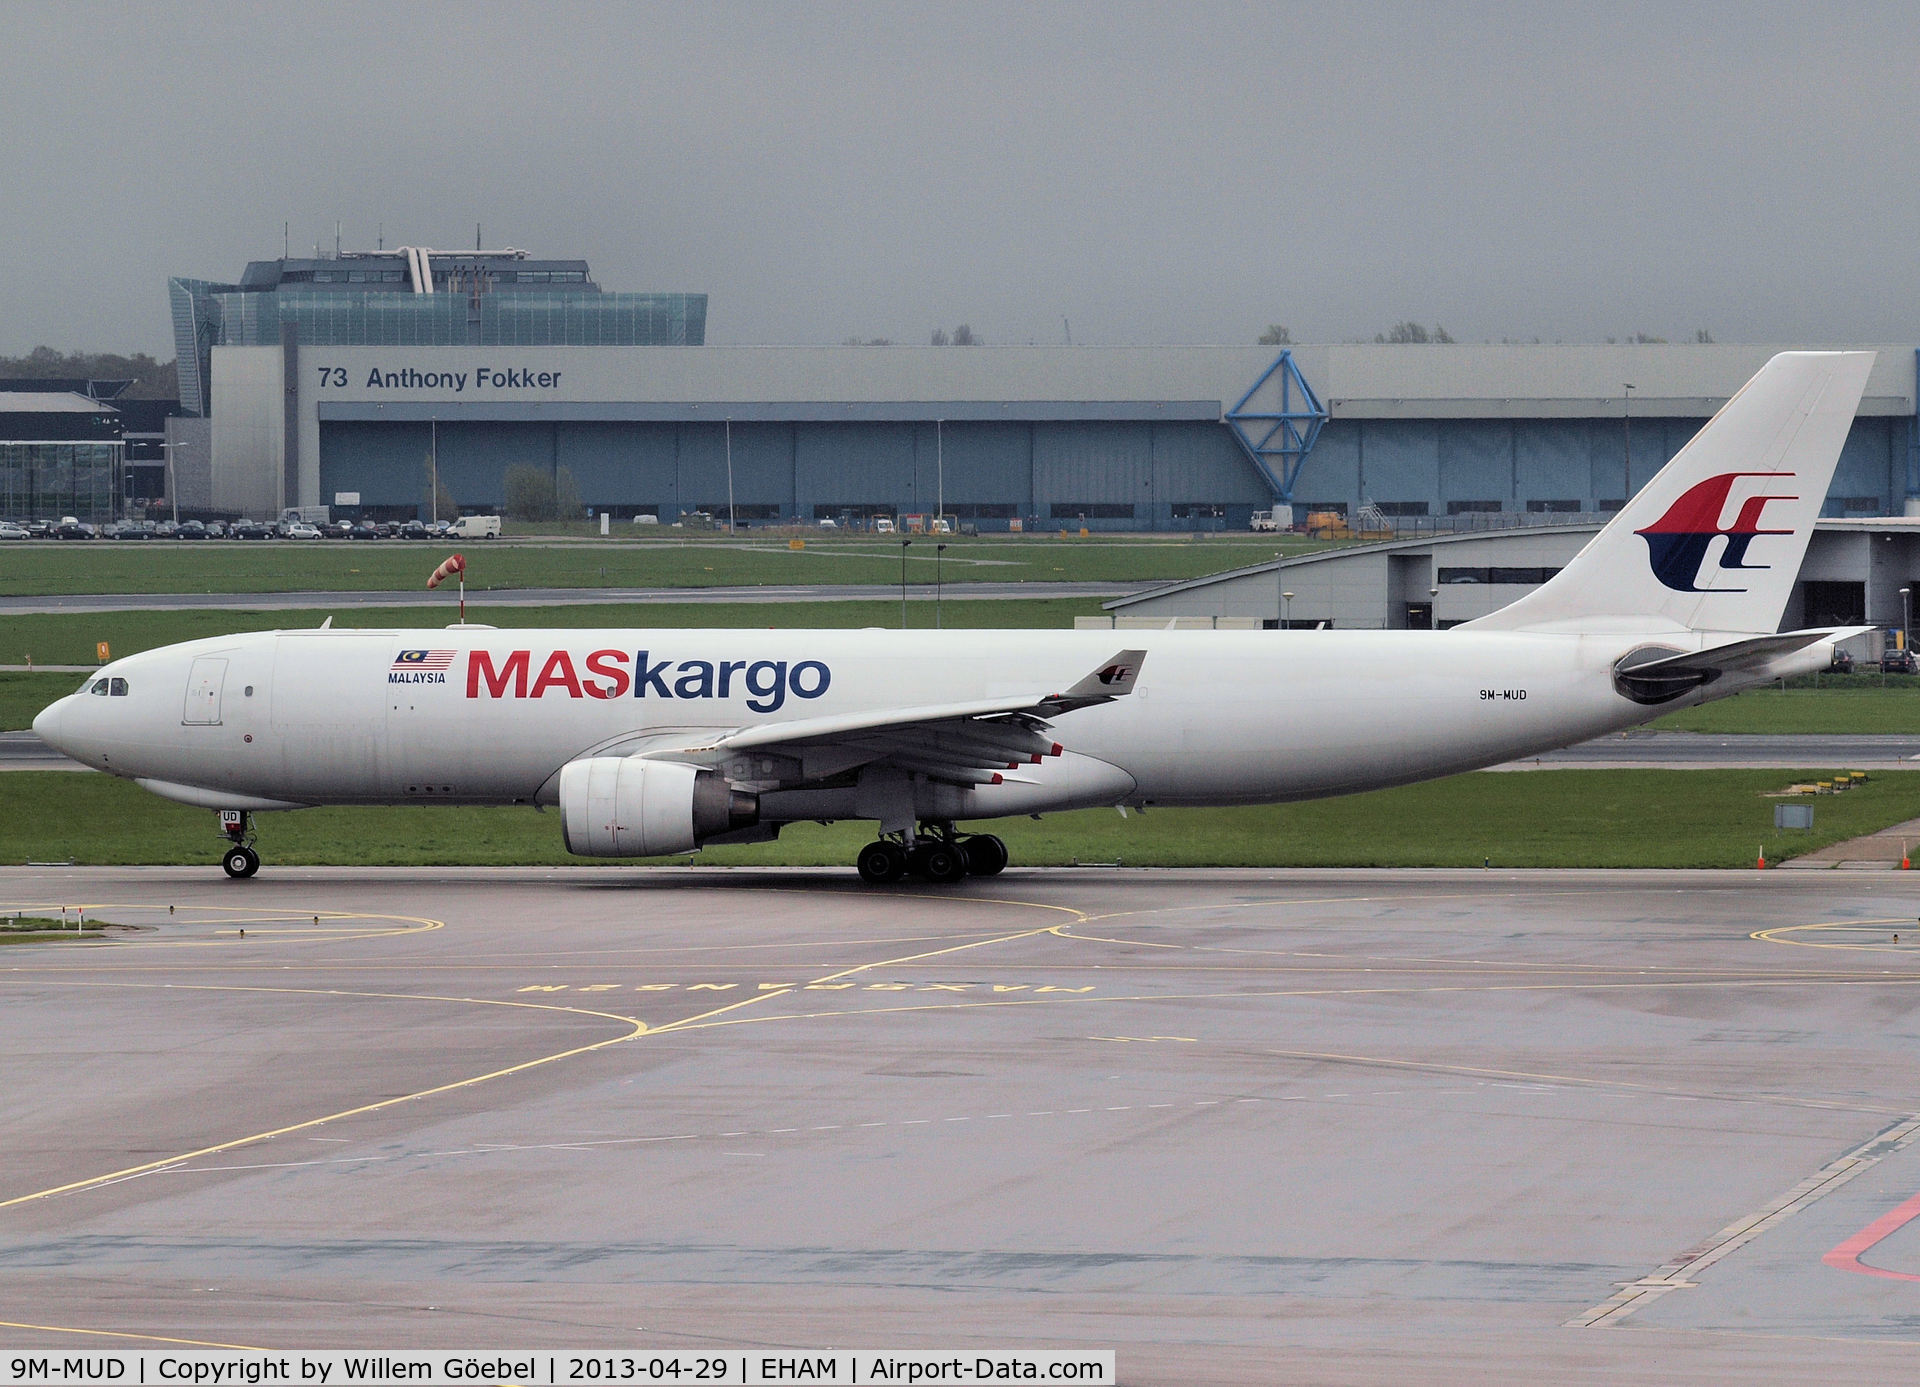 9M-MUD, 2012 Airbus A330-223F C/N 1180, Taxi to runway L18 of Schiphol Airport